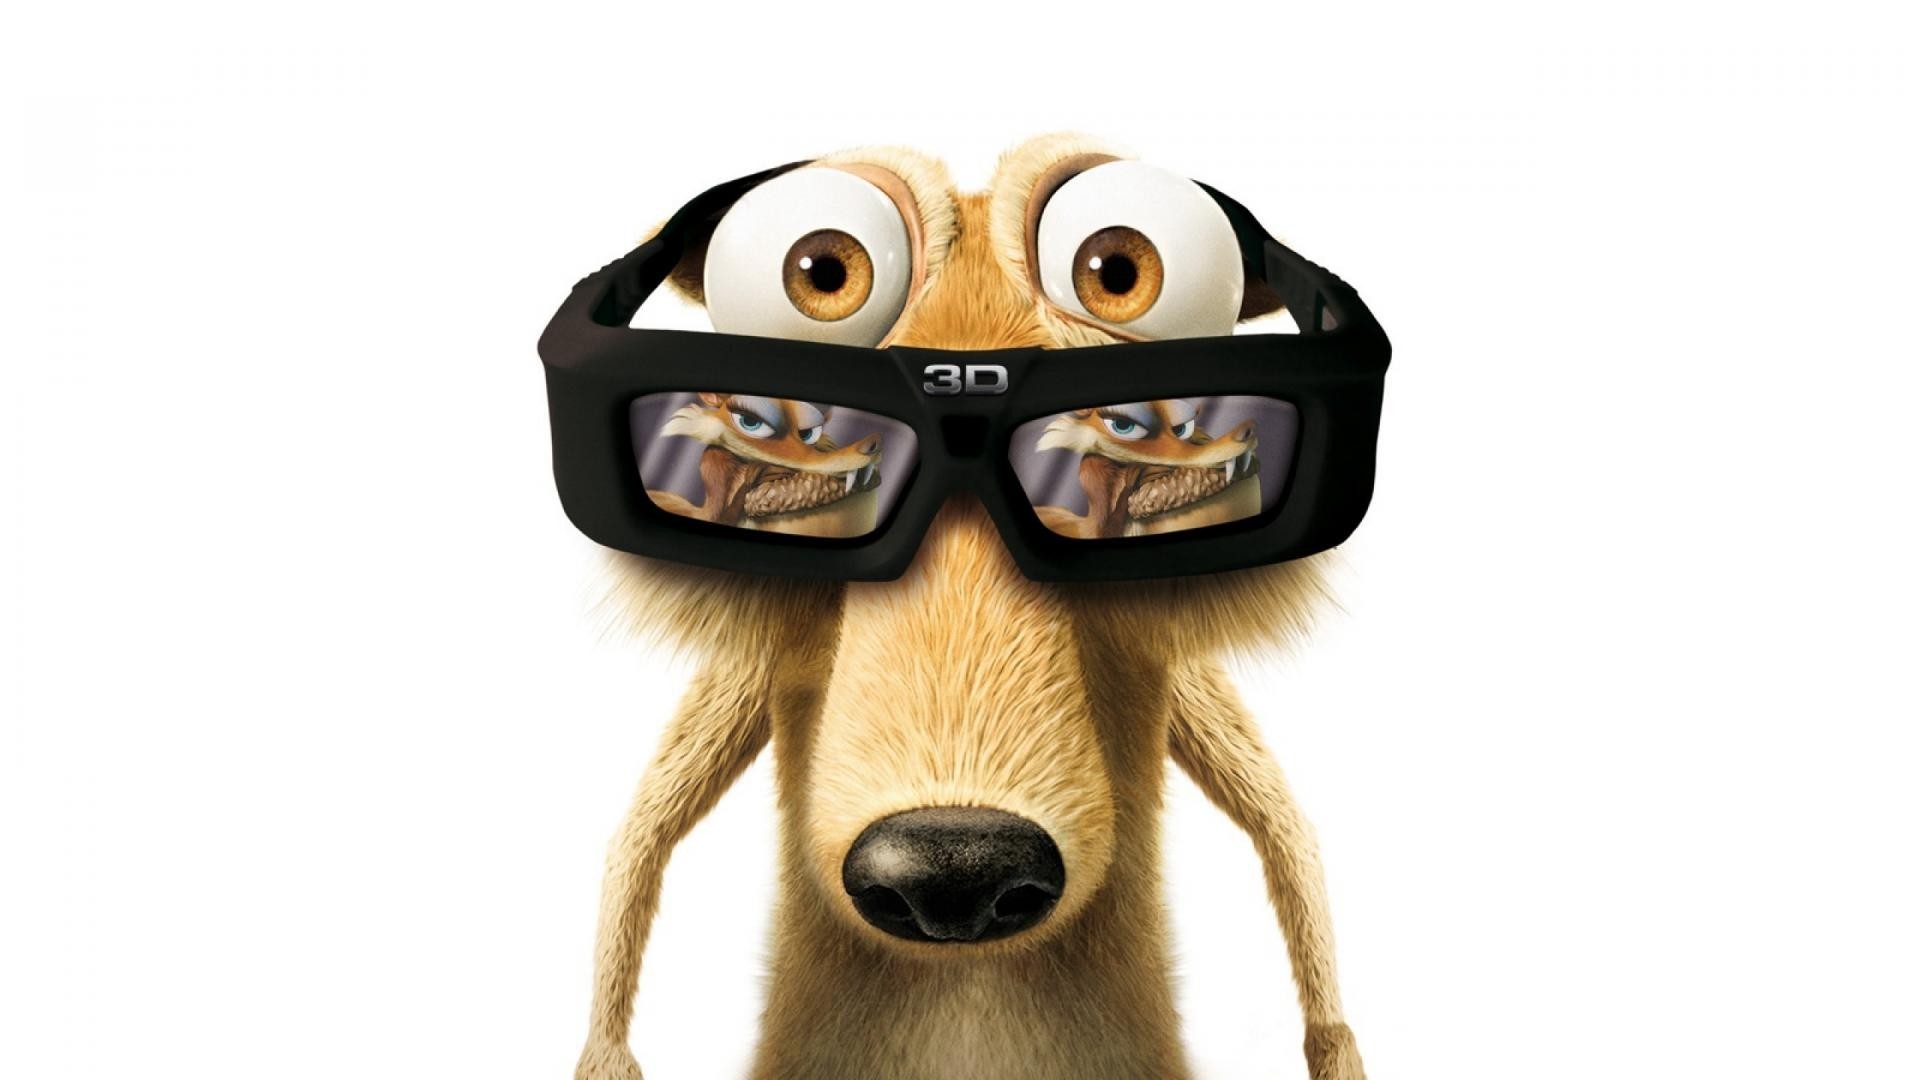 General 1920x1080 Scrat Ice Age CGI movies animated movies simple background white background frontal view